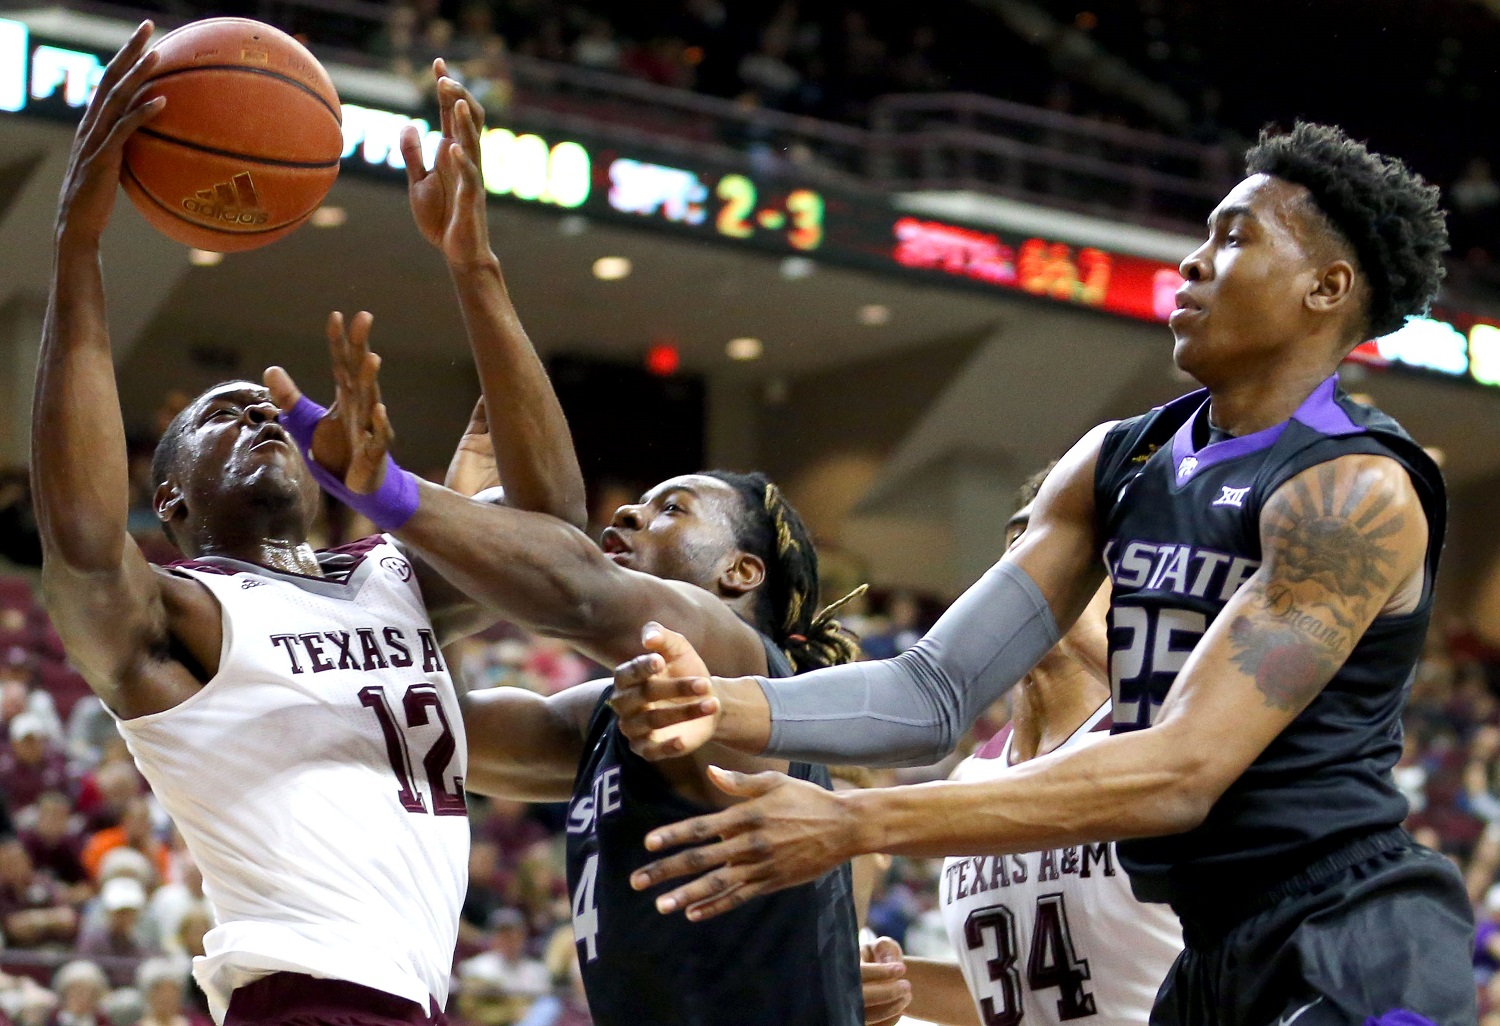 In this photo provided by Sam Craft, Texas A&amp;M's Jalen Jones (12) fights for a rebound against Kansas State's D.J. Johnson (4) and Wesley Iwundu (25) during an NCAA college basketball game on Saturday, Dec. 12, 2015, in College Station Texas. (Sam Craft via AP)